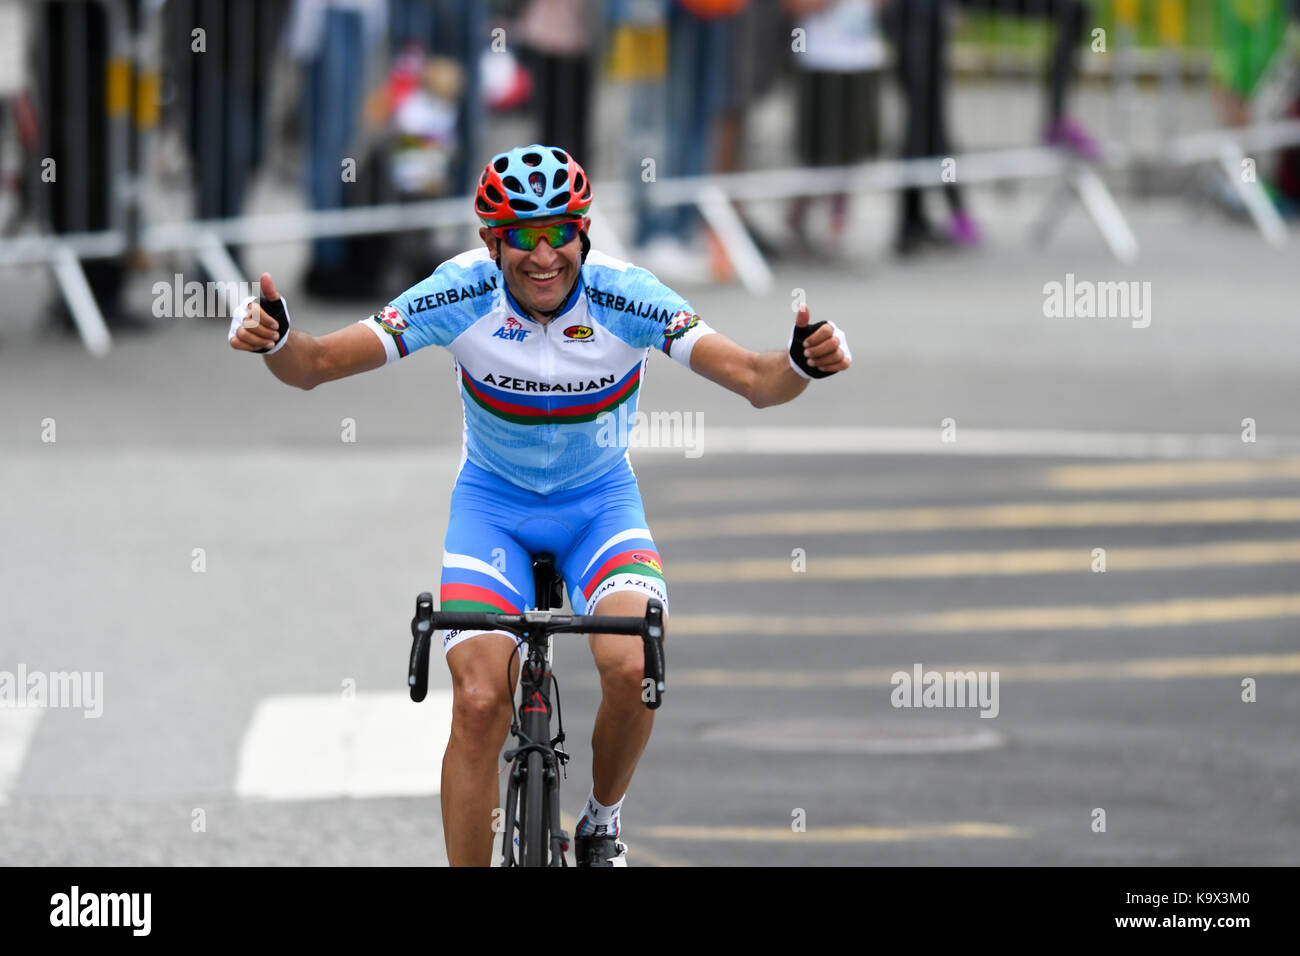 Bergen, Norway. 24th September, 2017. Elchin Asadov (Azerbaijan) was part of the early ten men breakway group. As the group got reeled in and the breakaway riders struggled with the peloton pace, and got dropped. Elchin Asadov was still all smiles and thanked the specatators along the course, before he abandoned the race for a DNF. Credit: Kjell Eirik Irgens Henanger/Alamy Live News Stock Photo